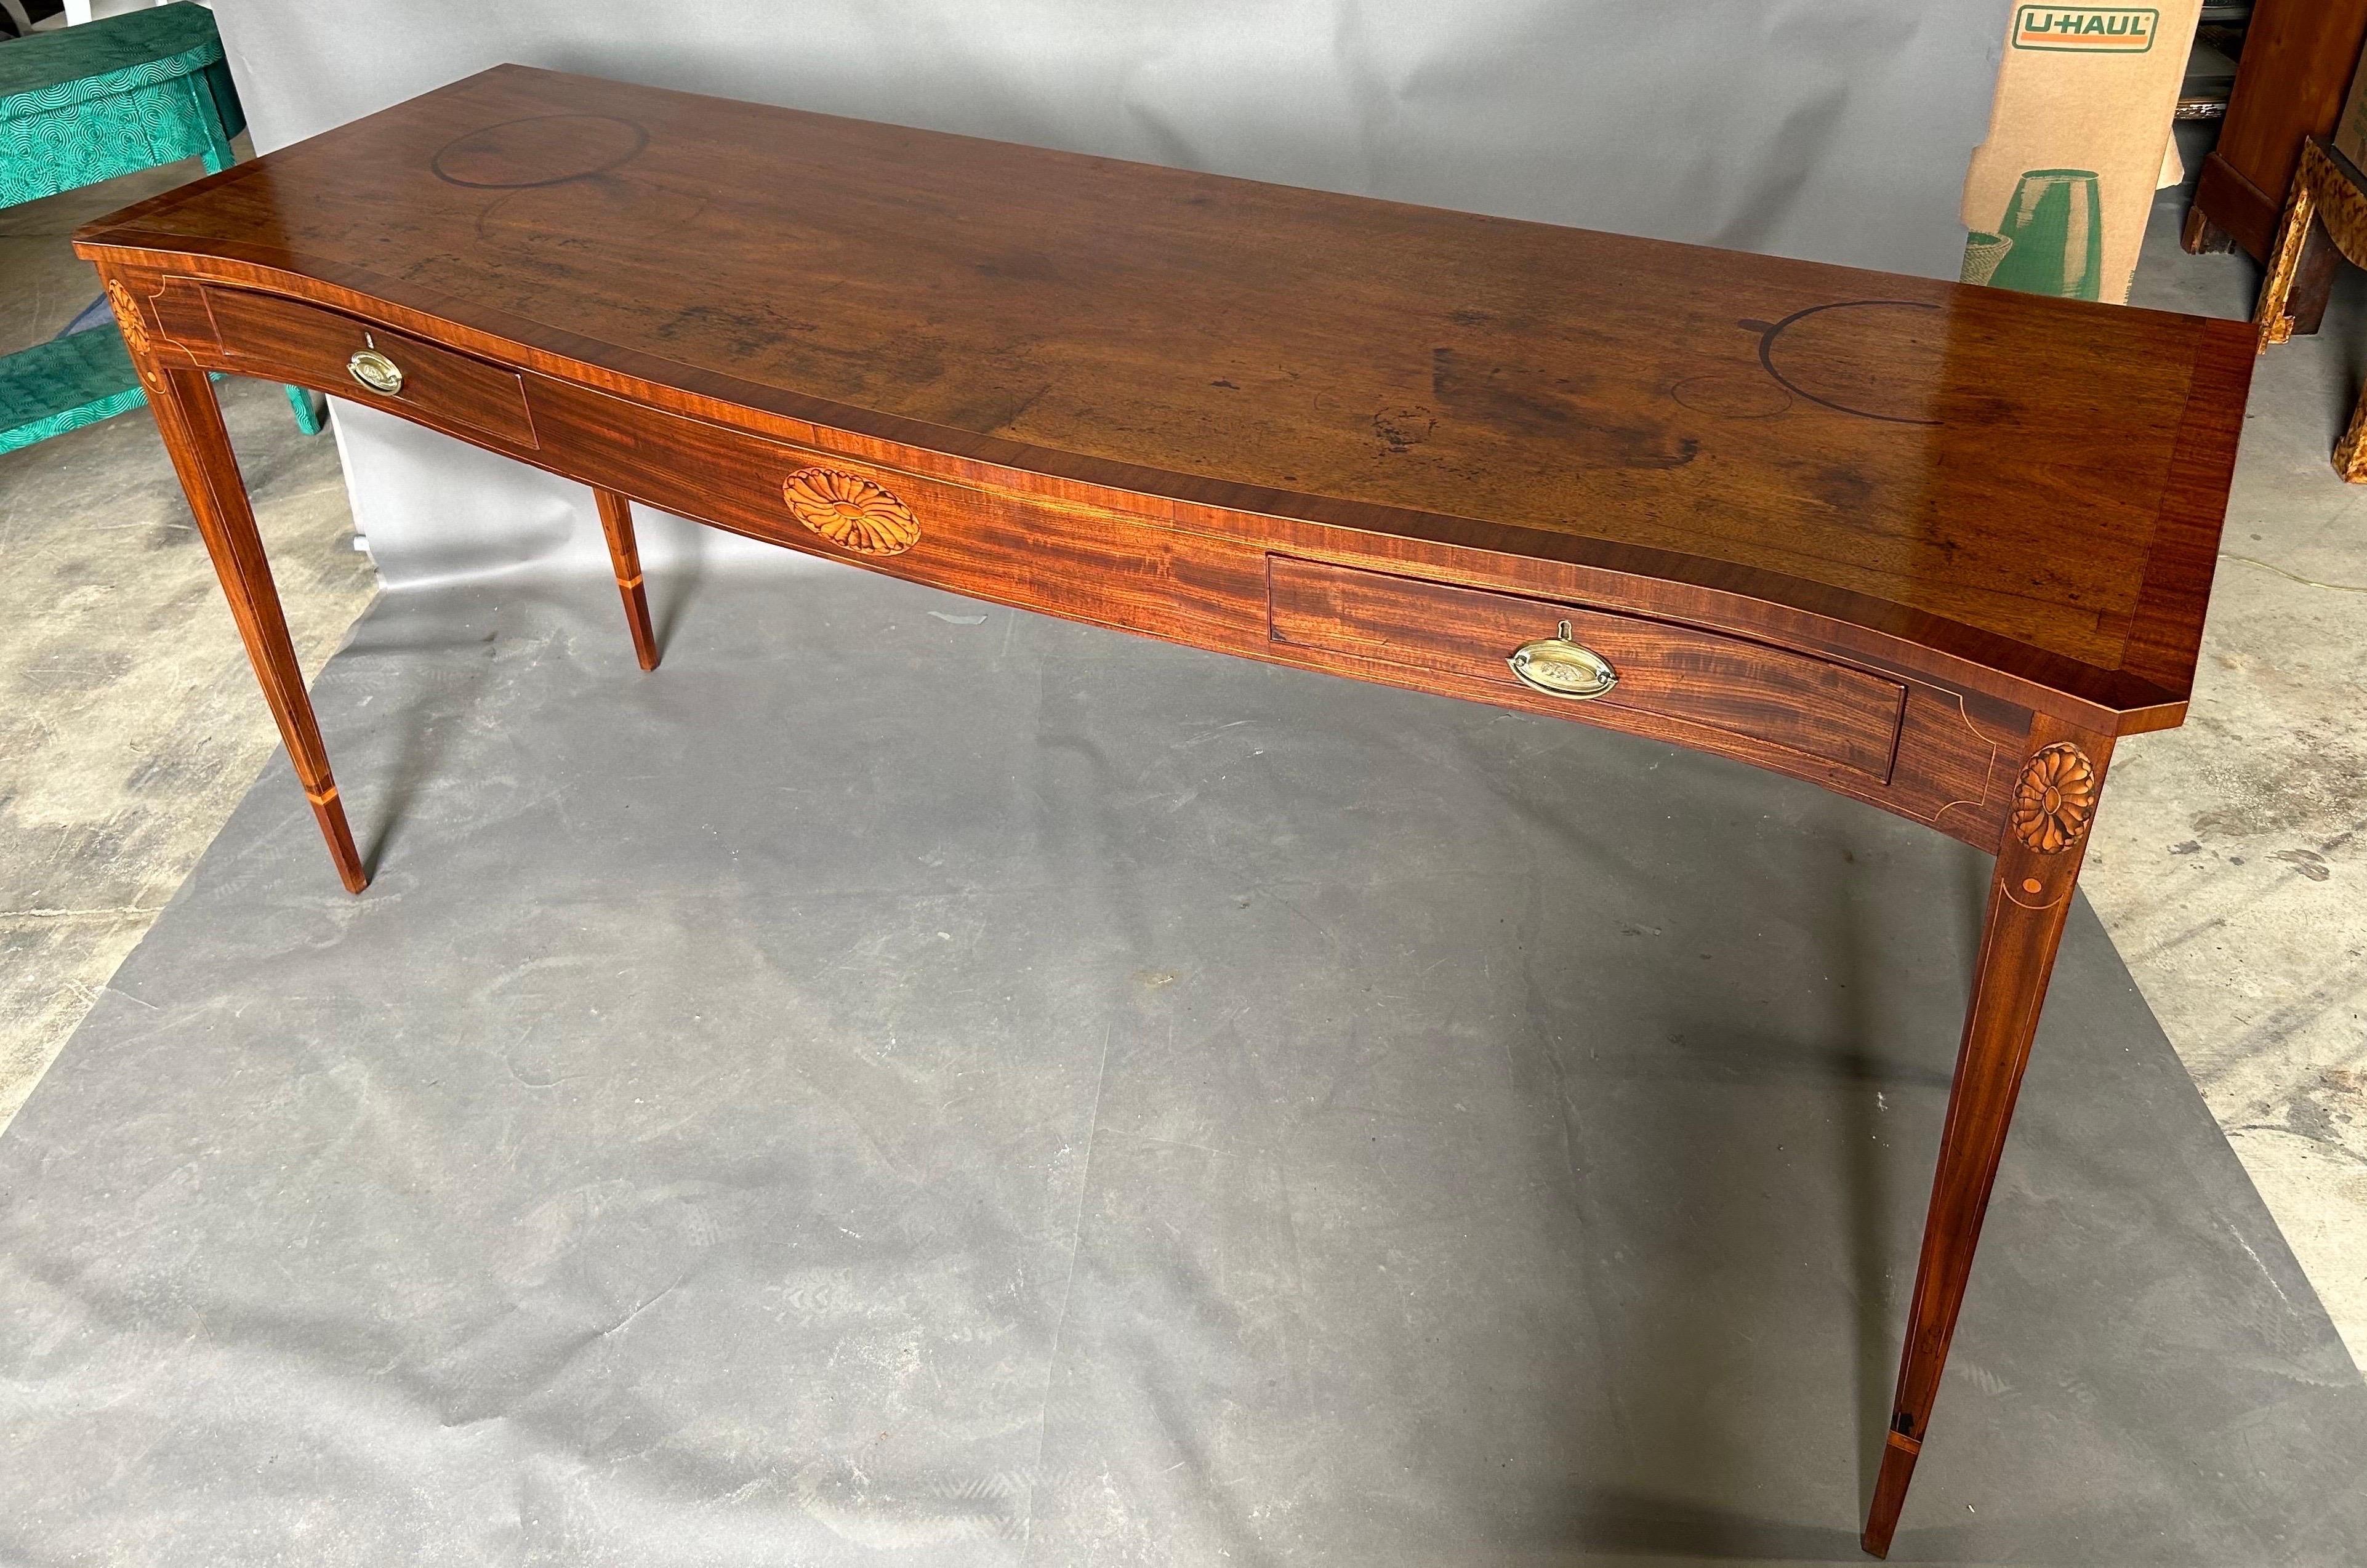 Fine late 18th century Georgian serpentine inlaid mahogany server or sideboard standing 40” high. The sideboard features a highly figured and crossbanded  top, tapered legs, and gorgeous paterae inlay. Wonderful warm mellow finish all over with 